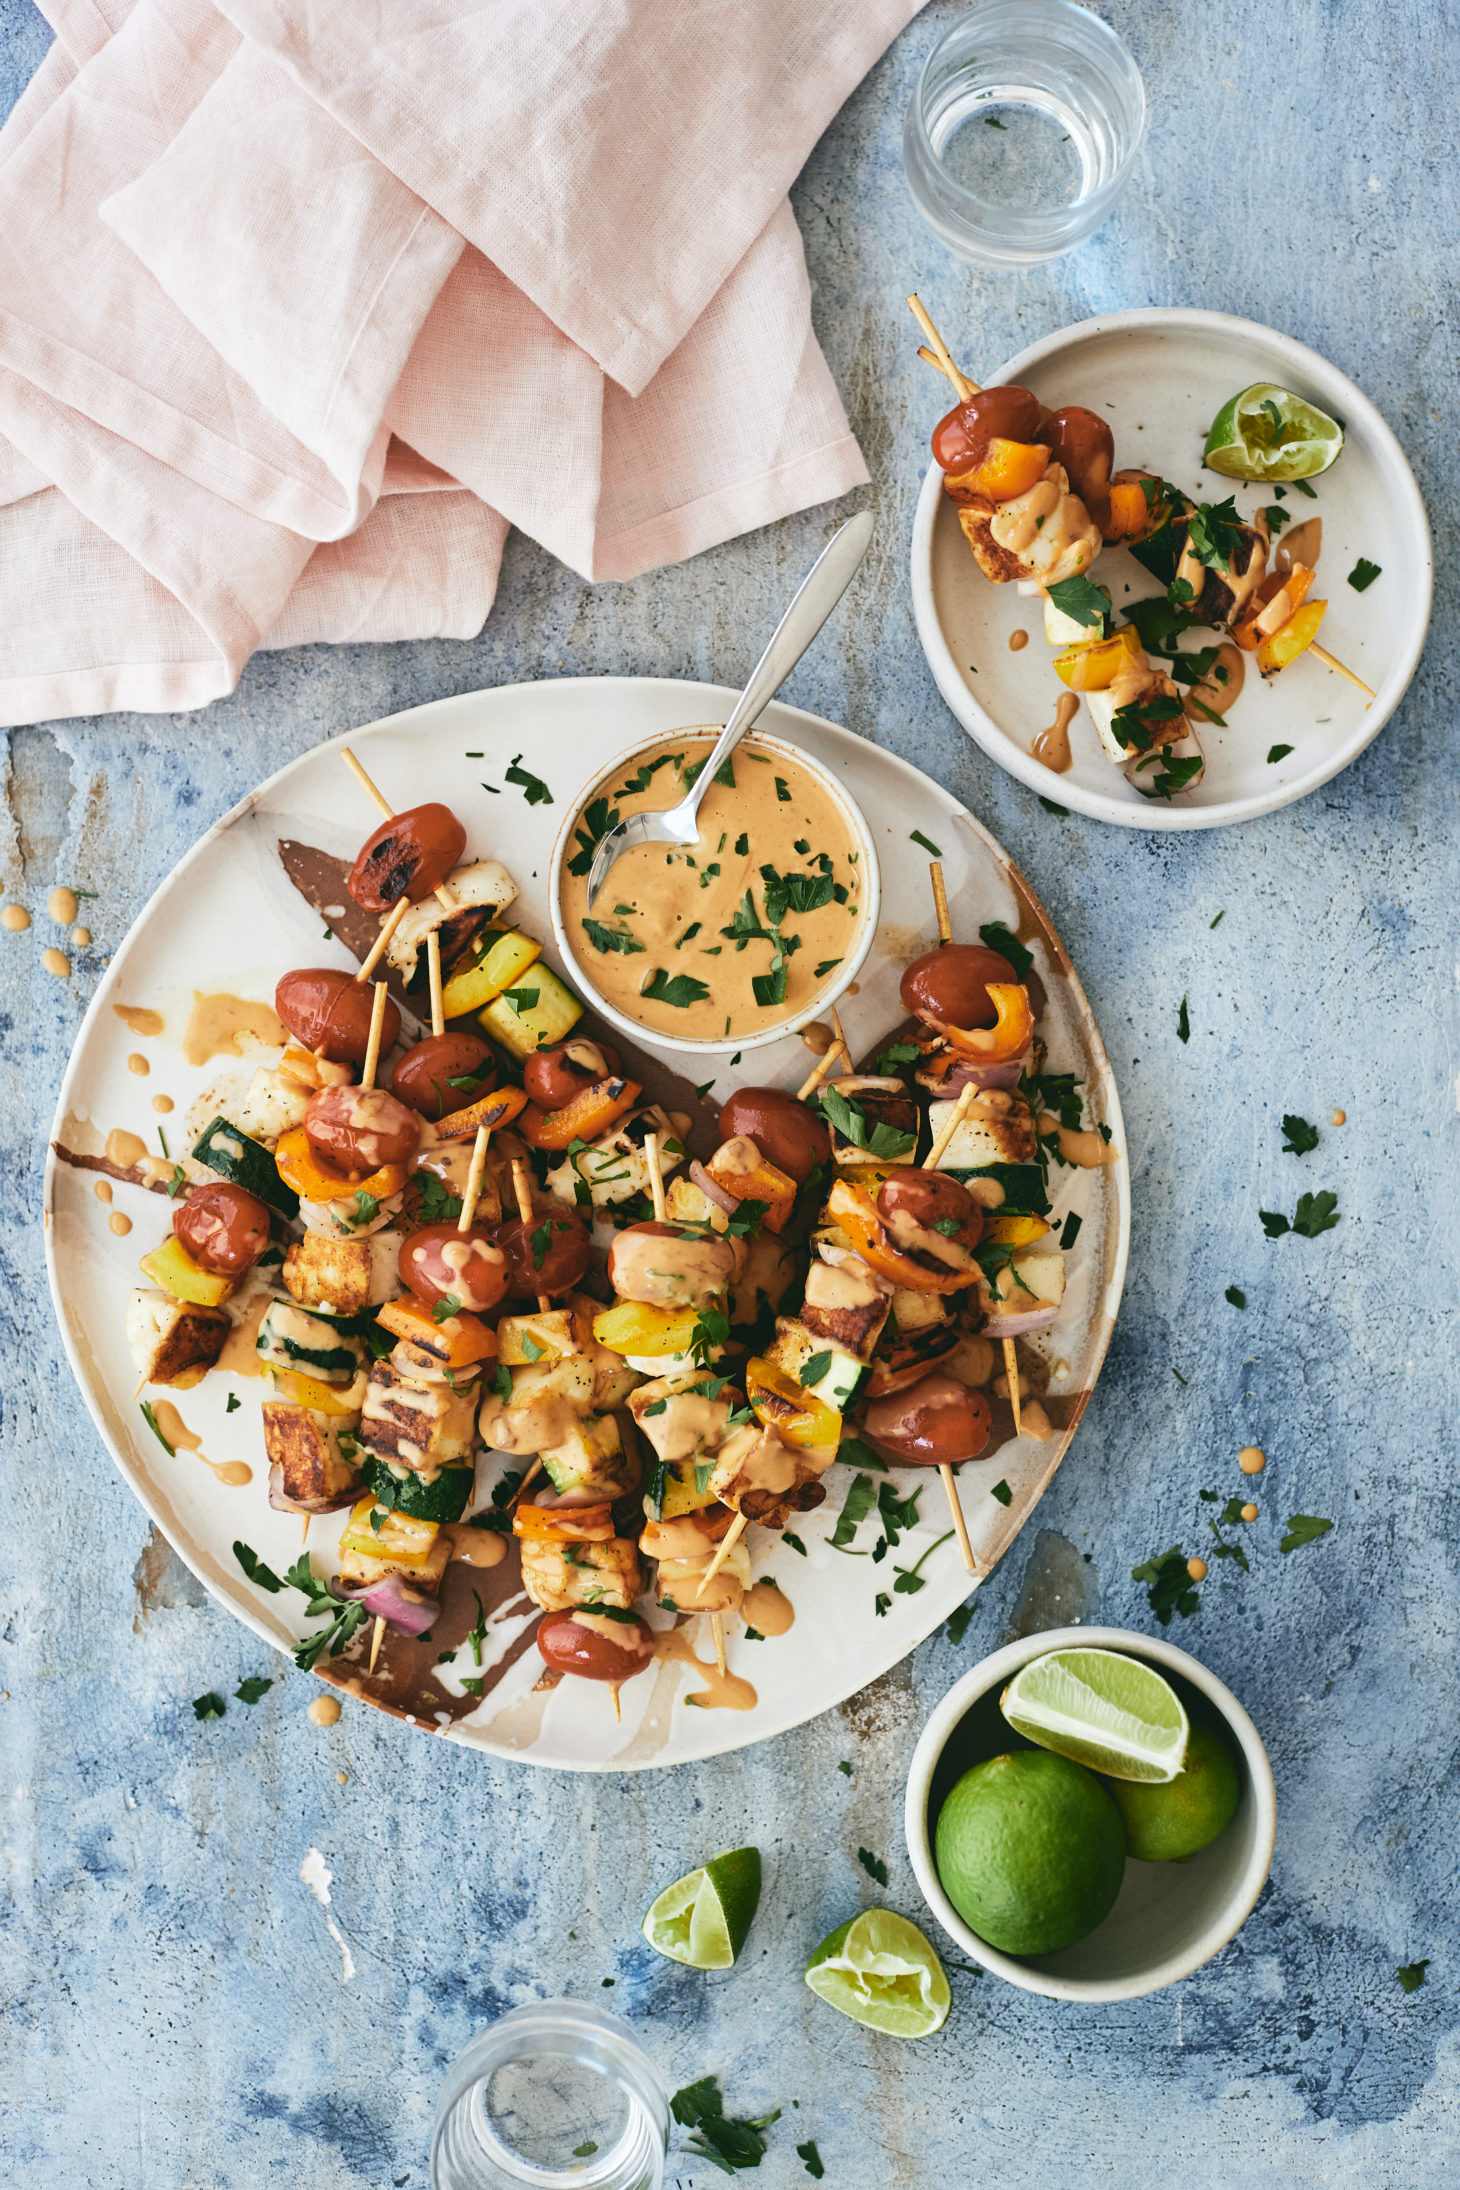 Overhead photograph of halloumi and summer vegetable skewers topped with a chipotle peanut sauce